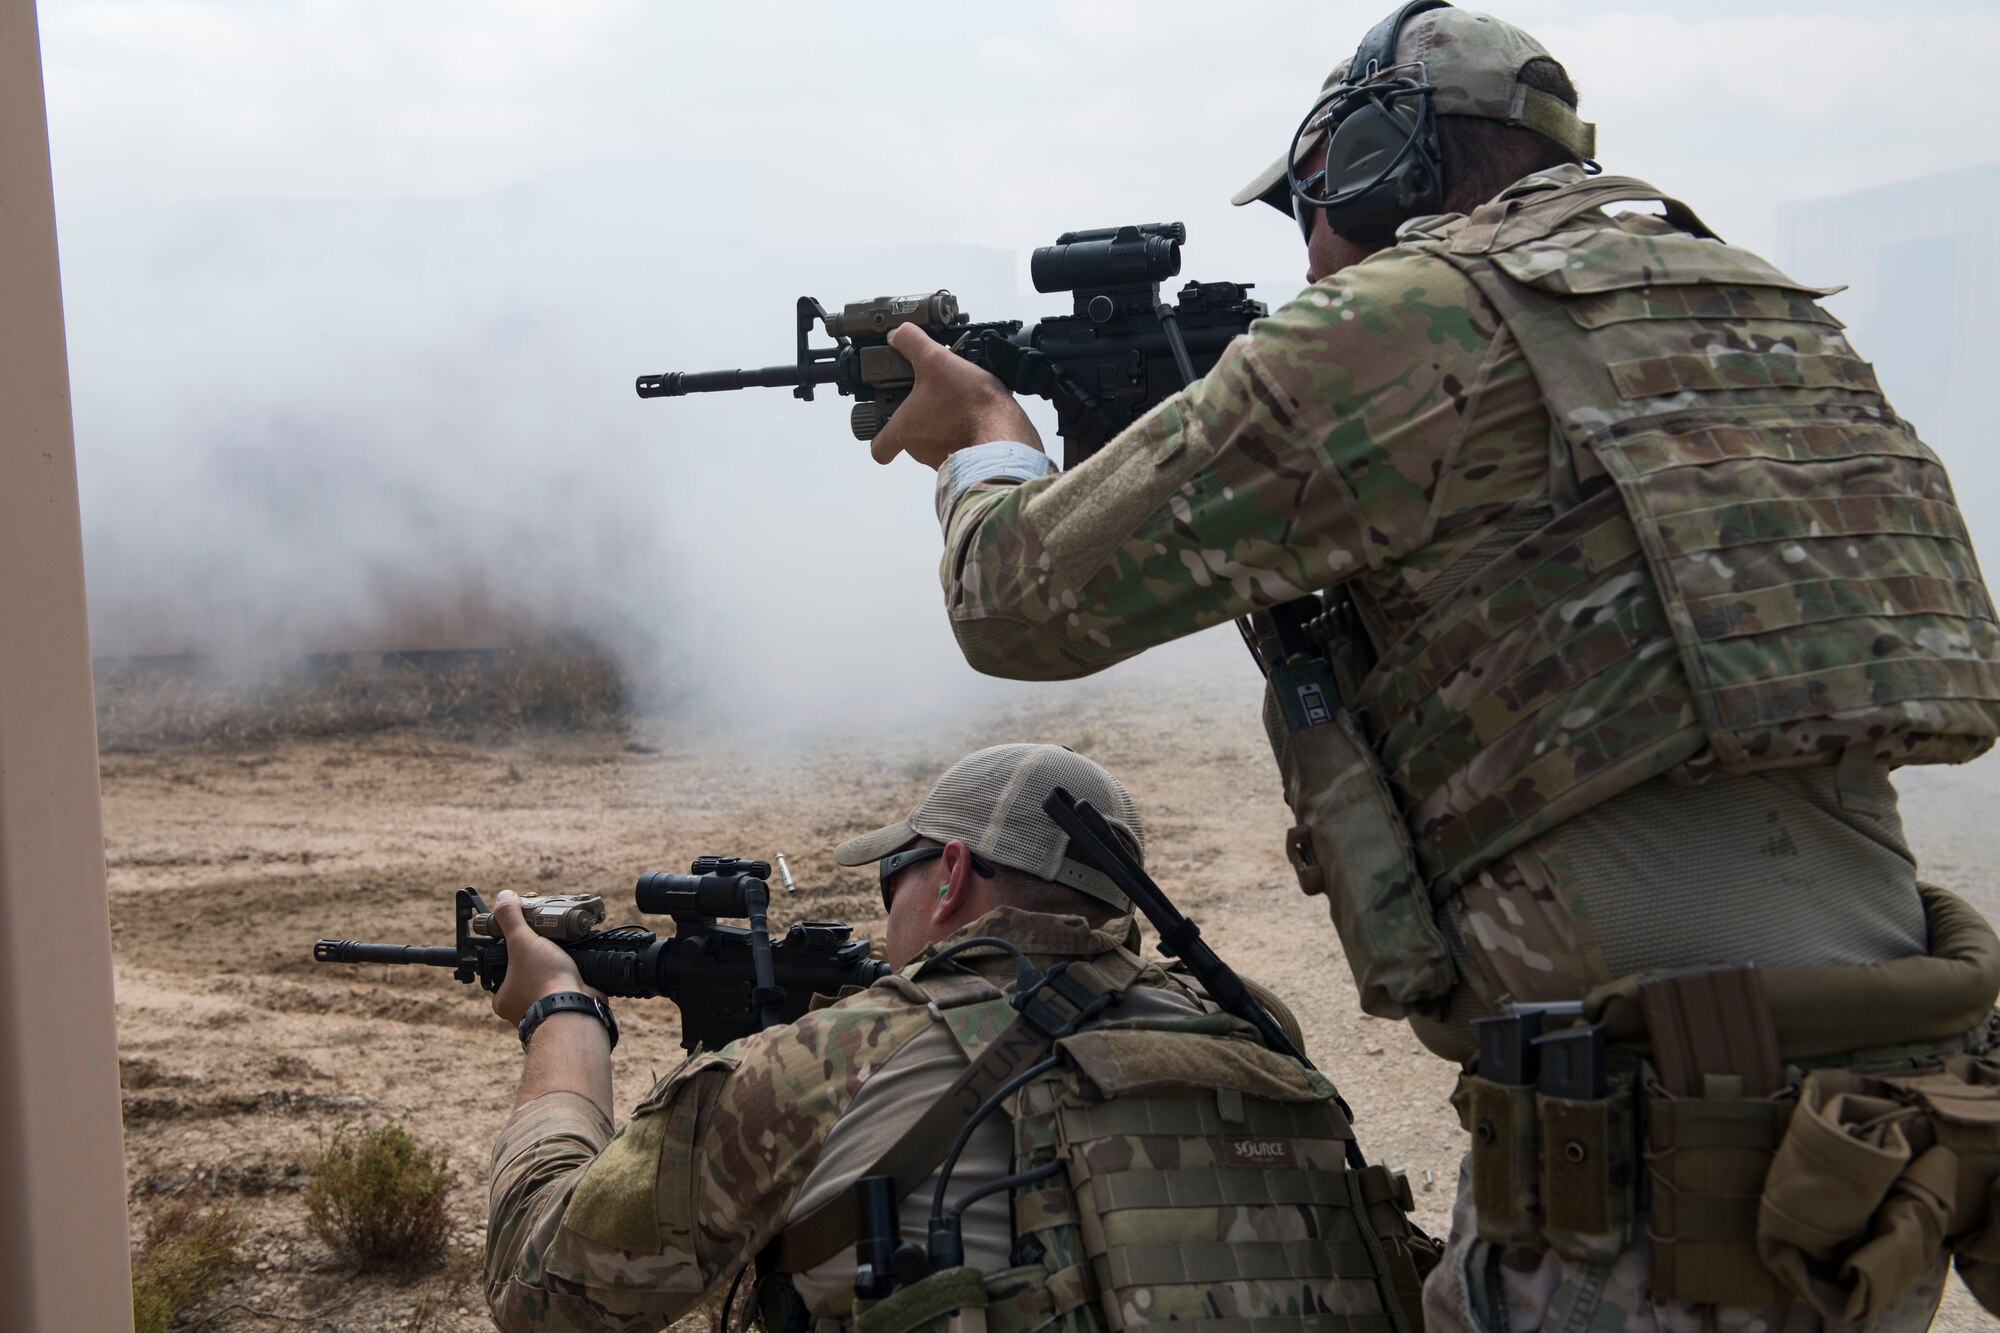 Students aim down the sights of M4 carbines during a full spectrum operator course, Aug. 30, 2018, at Smoky Hill Air National Guard Range, Kan. The course was held Aug. 26-31, and incorporated specific duties performed by tactical air control party members and security forces personnel to build on their gunfighting skills. (U.S. Air Force photo by Senior Airman Janiqua P. Robinson)